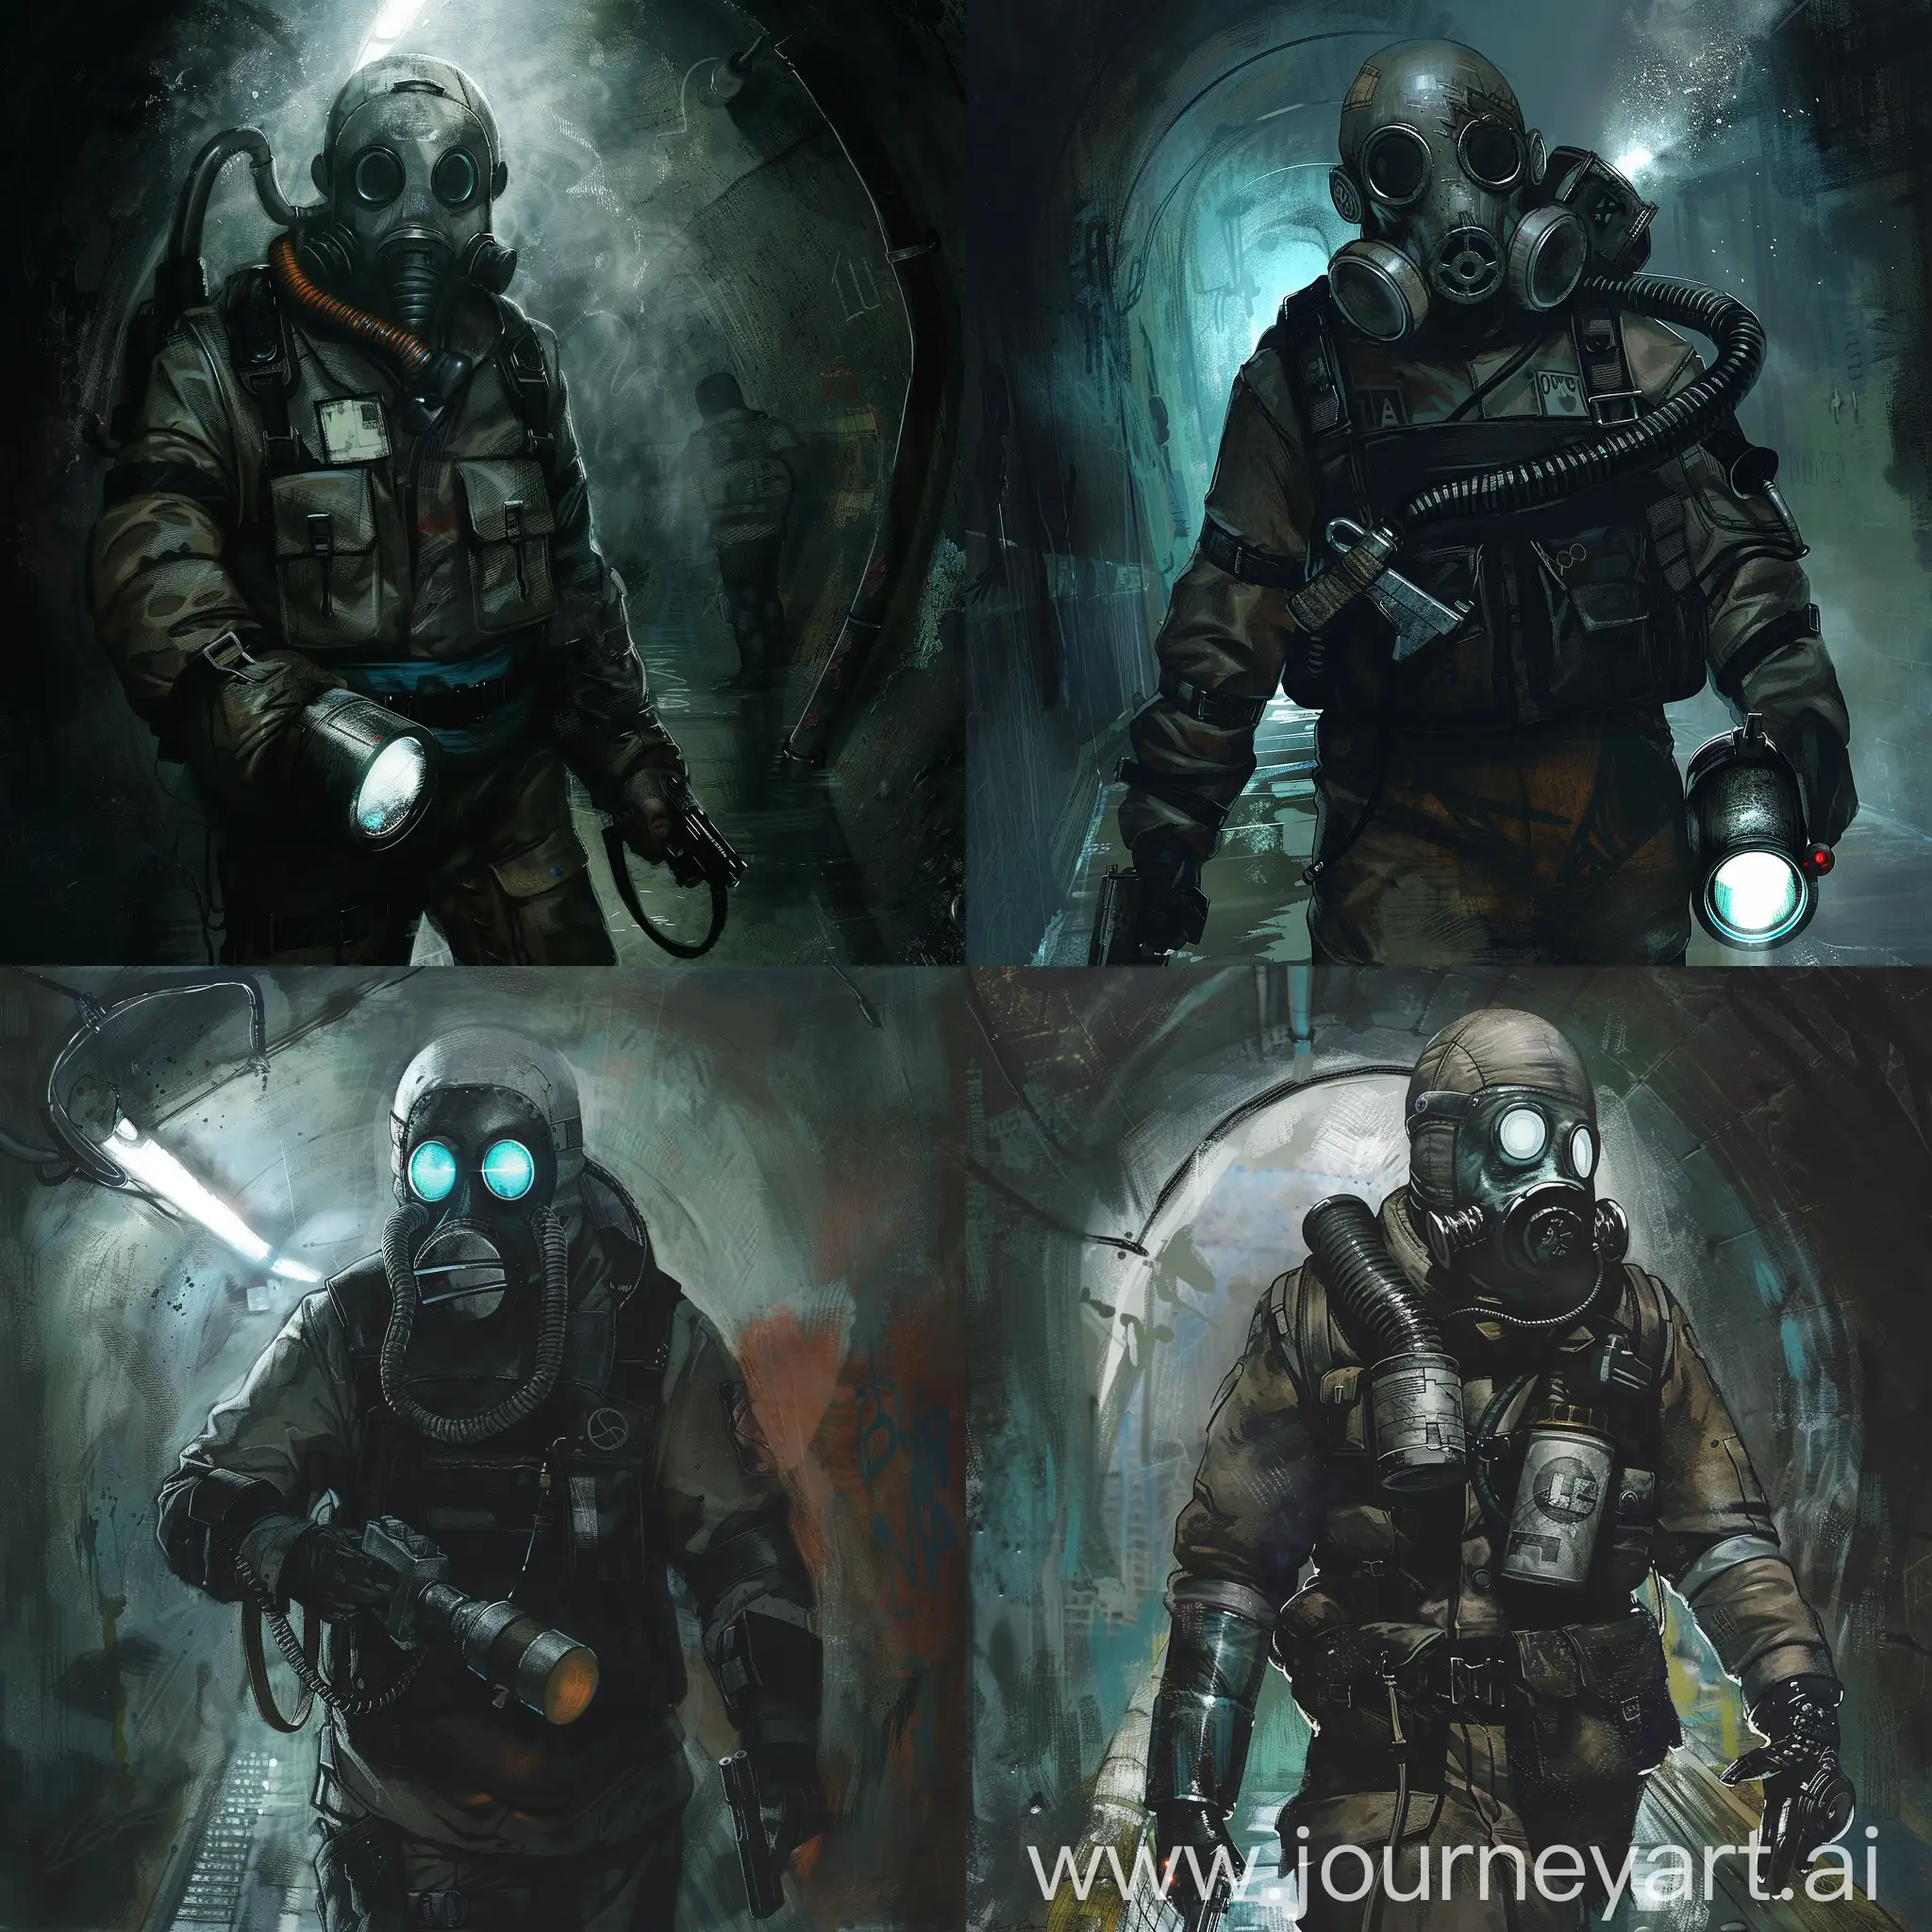 Metro 2033 art, a one survivor in a gasmask, in overalls, in the stalker's hand a large searchlight flashlight with a pen, in the other a pistol, the survivor walks through the flooded catacombs of the radioactive subway, no light sources, complete darkness behind.